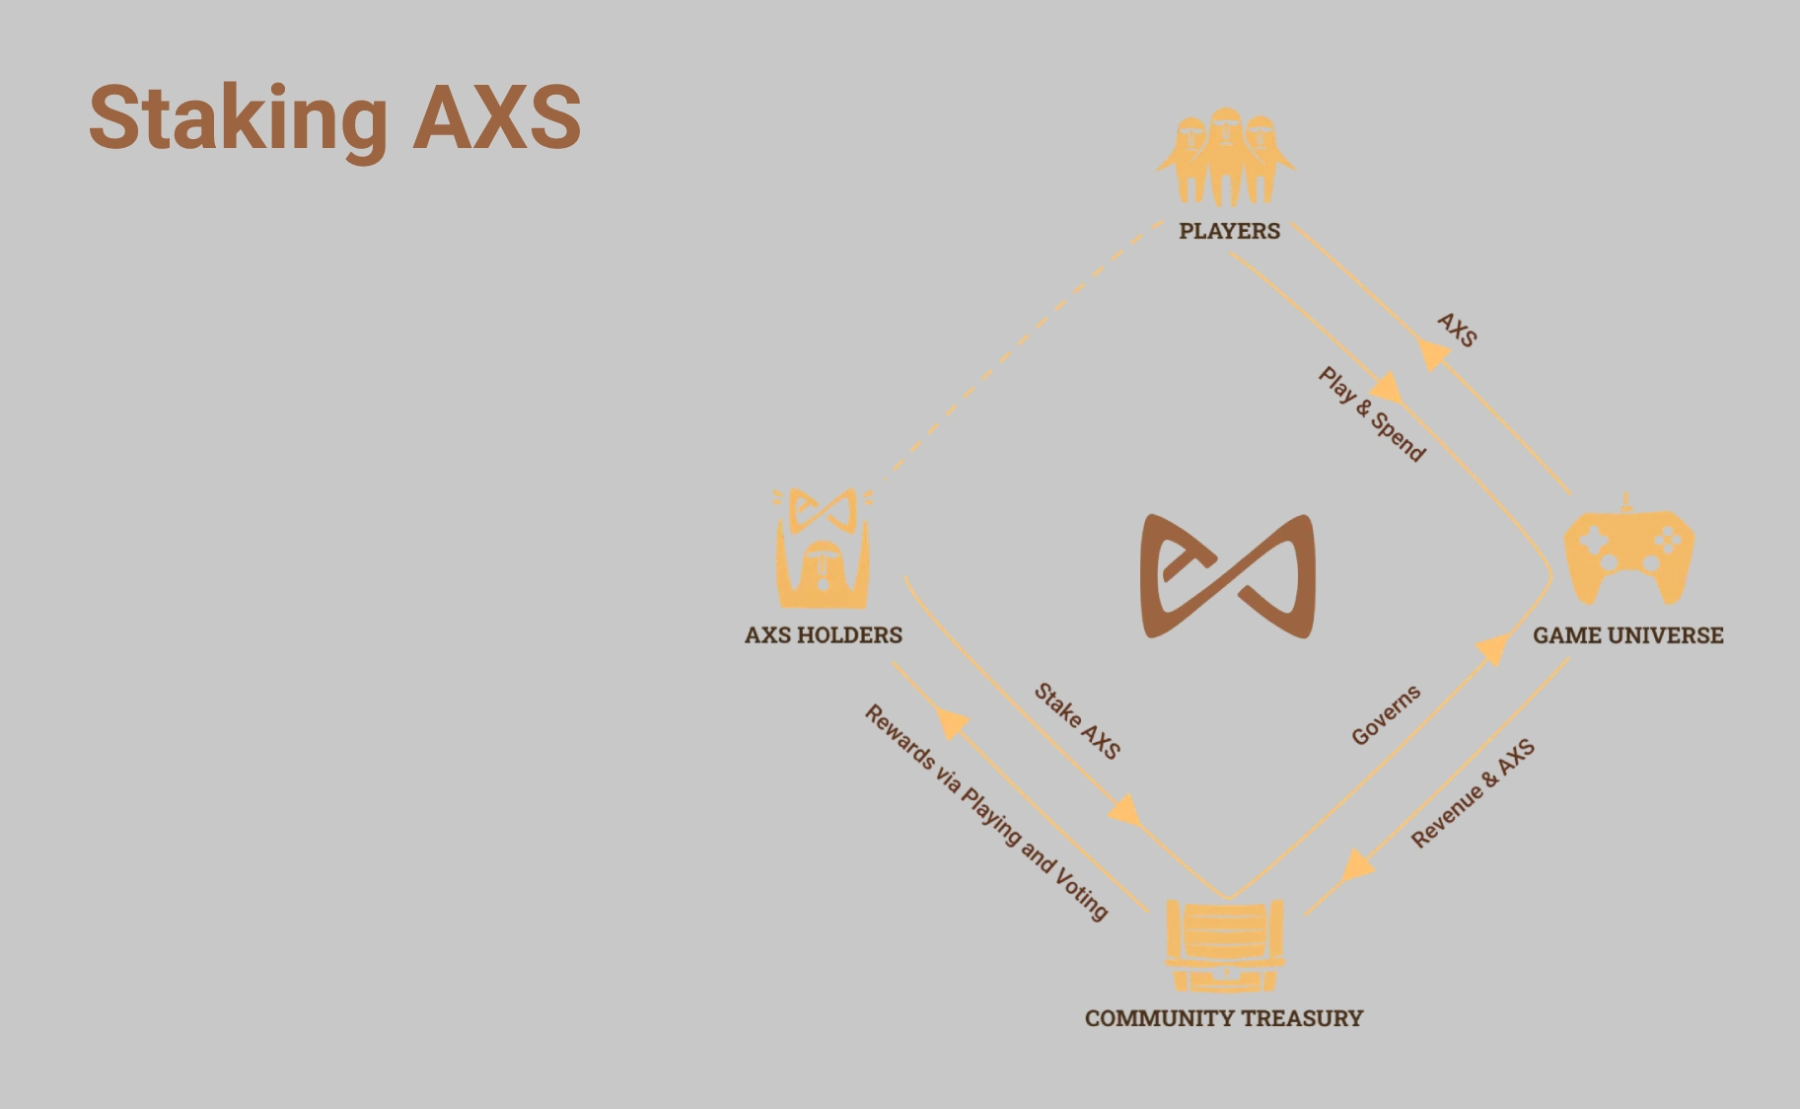 Staking AXS